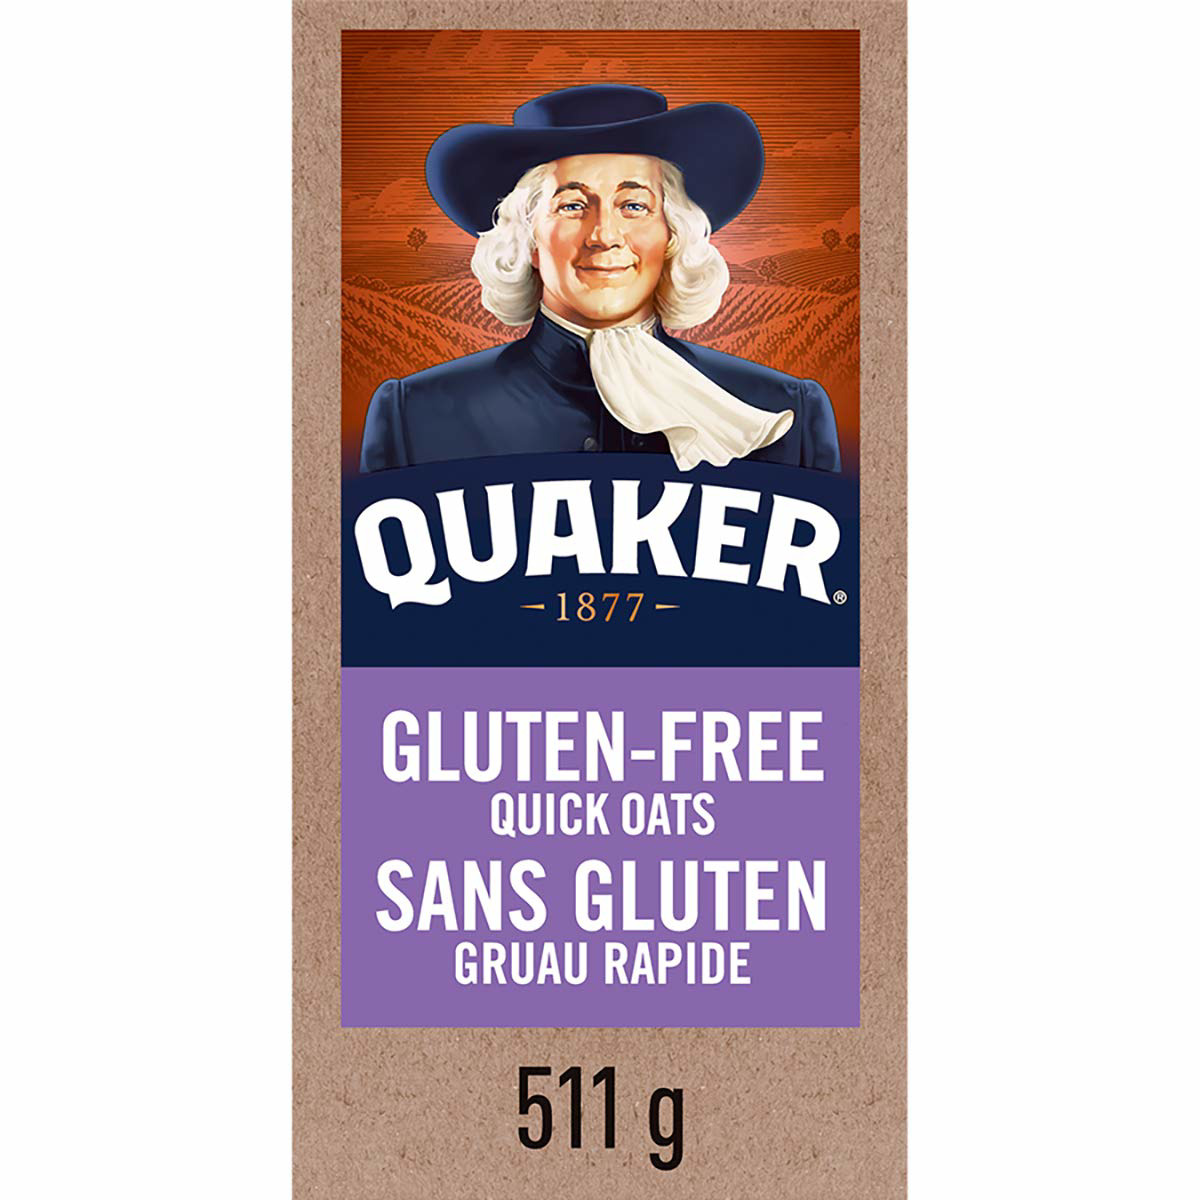 Instant Quaker Oats Quaker Gluten-Free Quick Oats, 511g - Imported from Canada